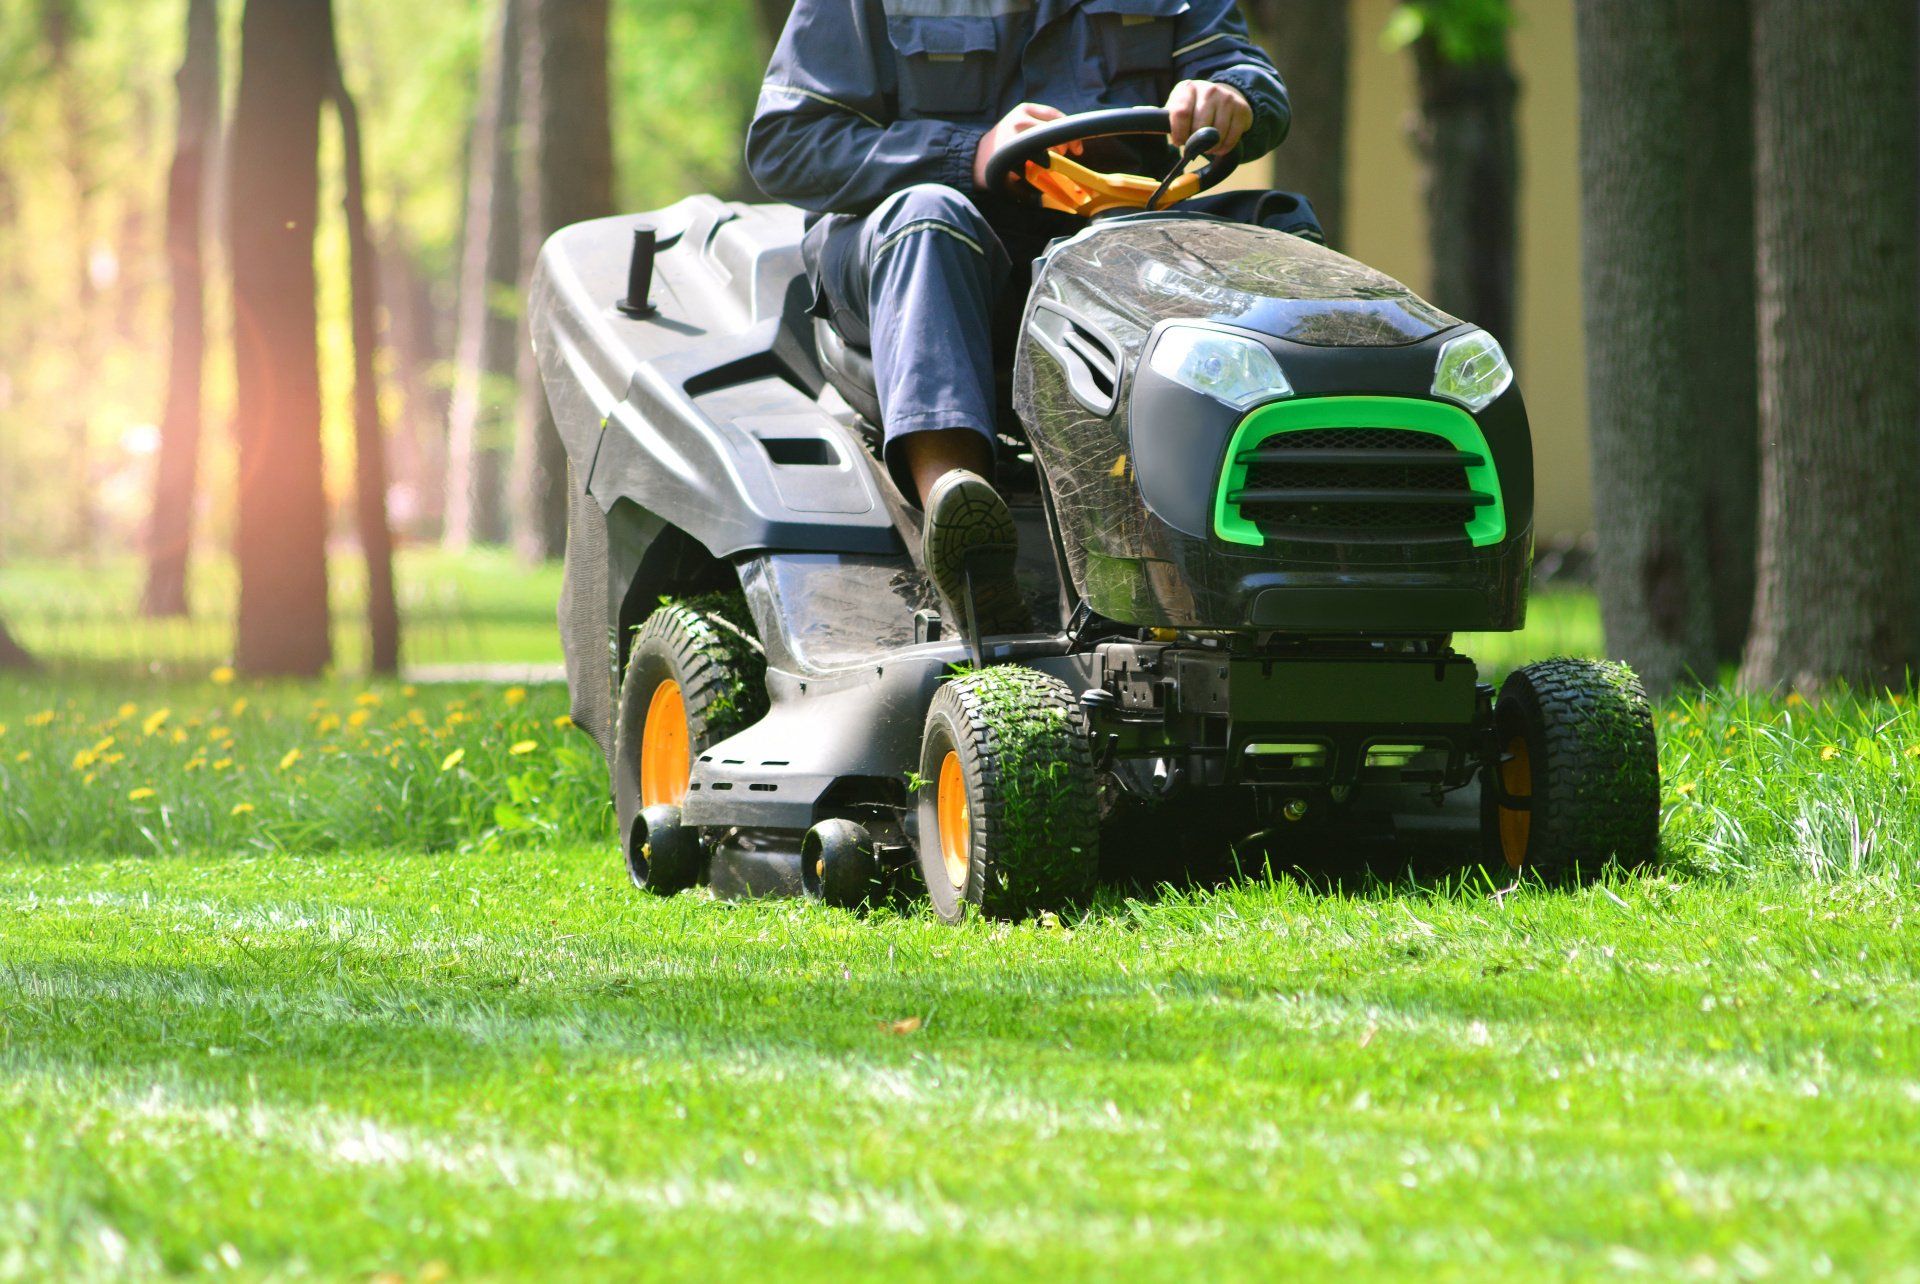 Baton Rouge Mowing Company: Mowing Service for Your Residential Lawn